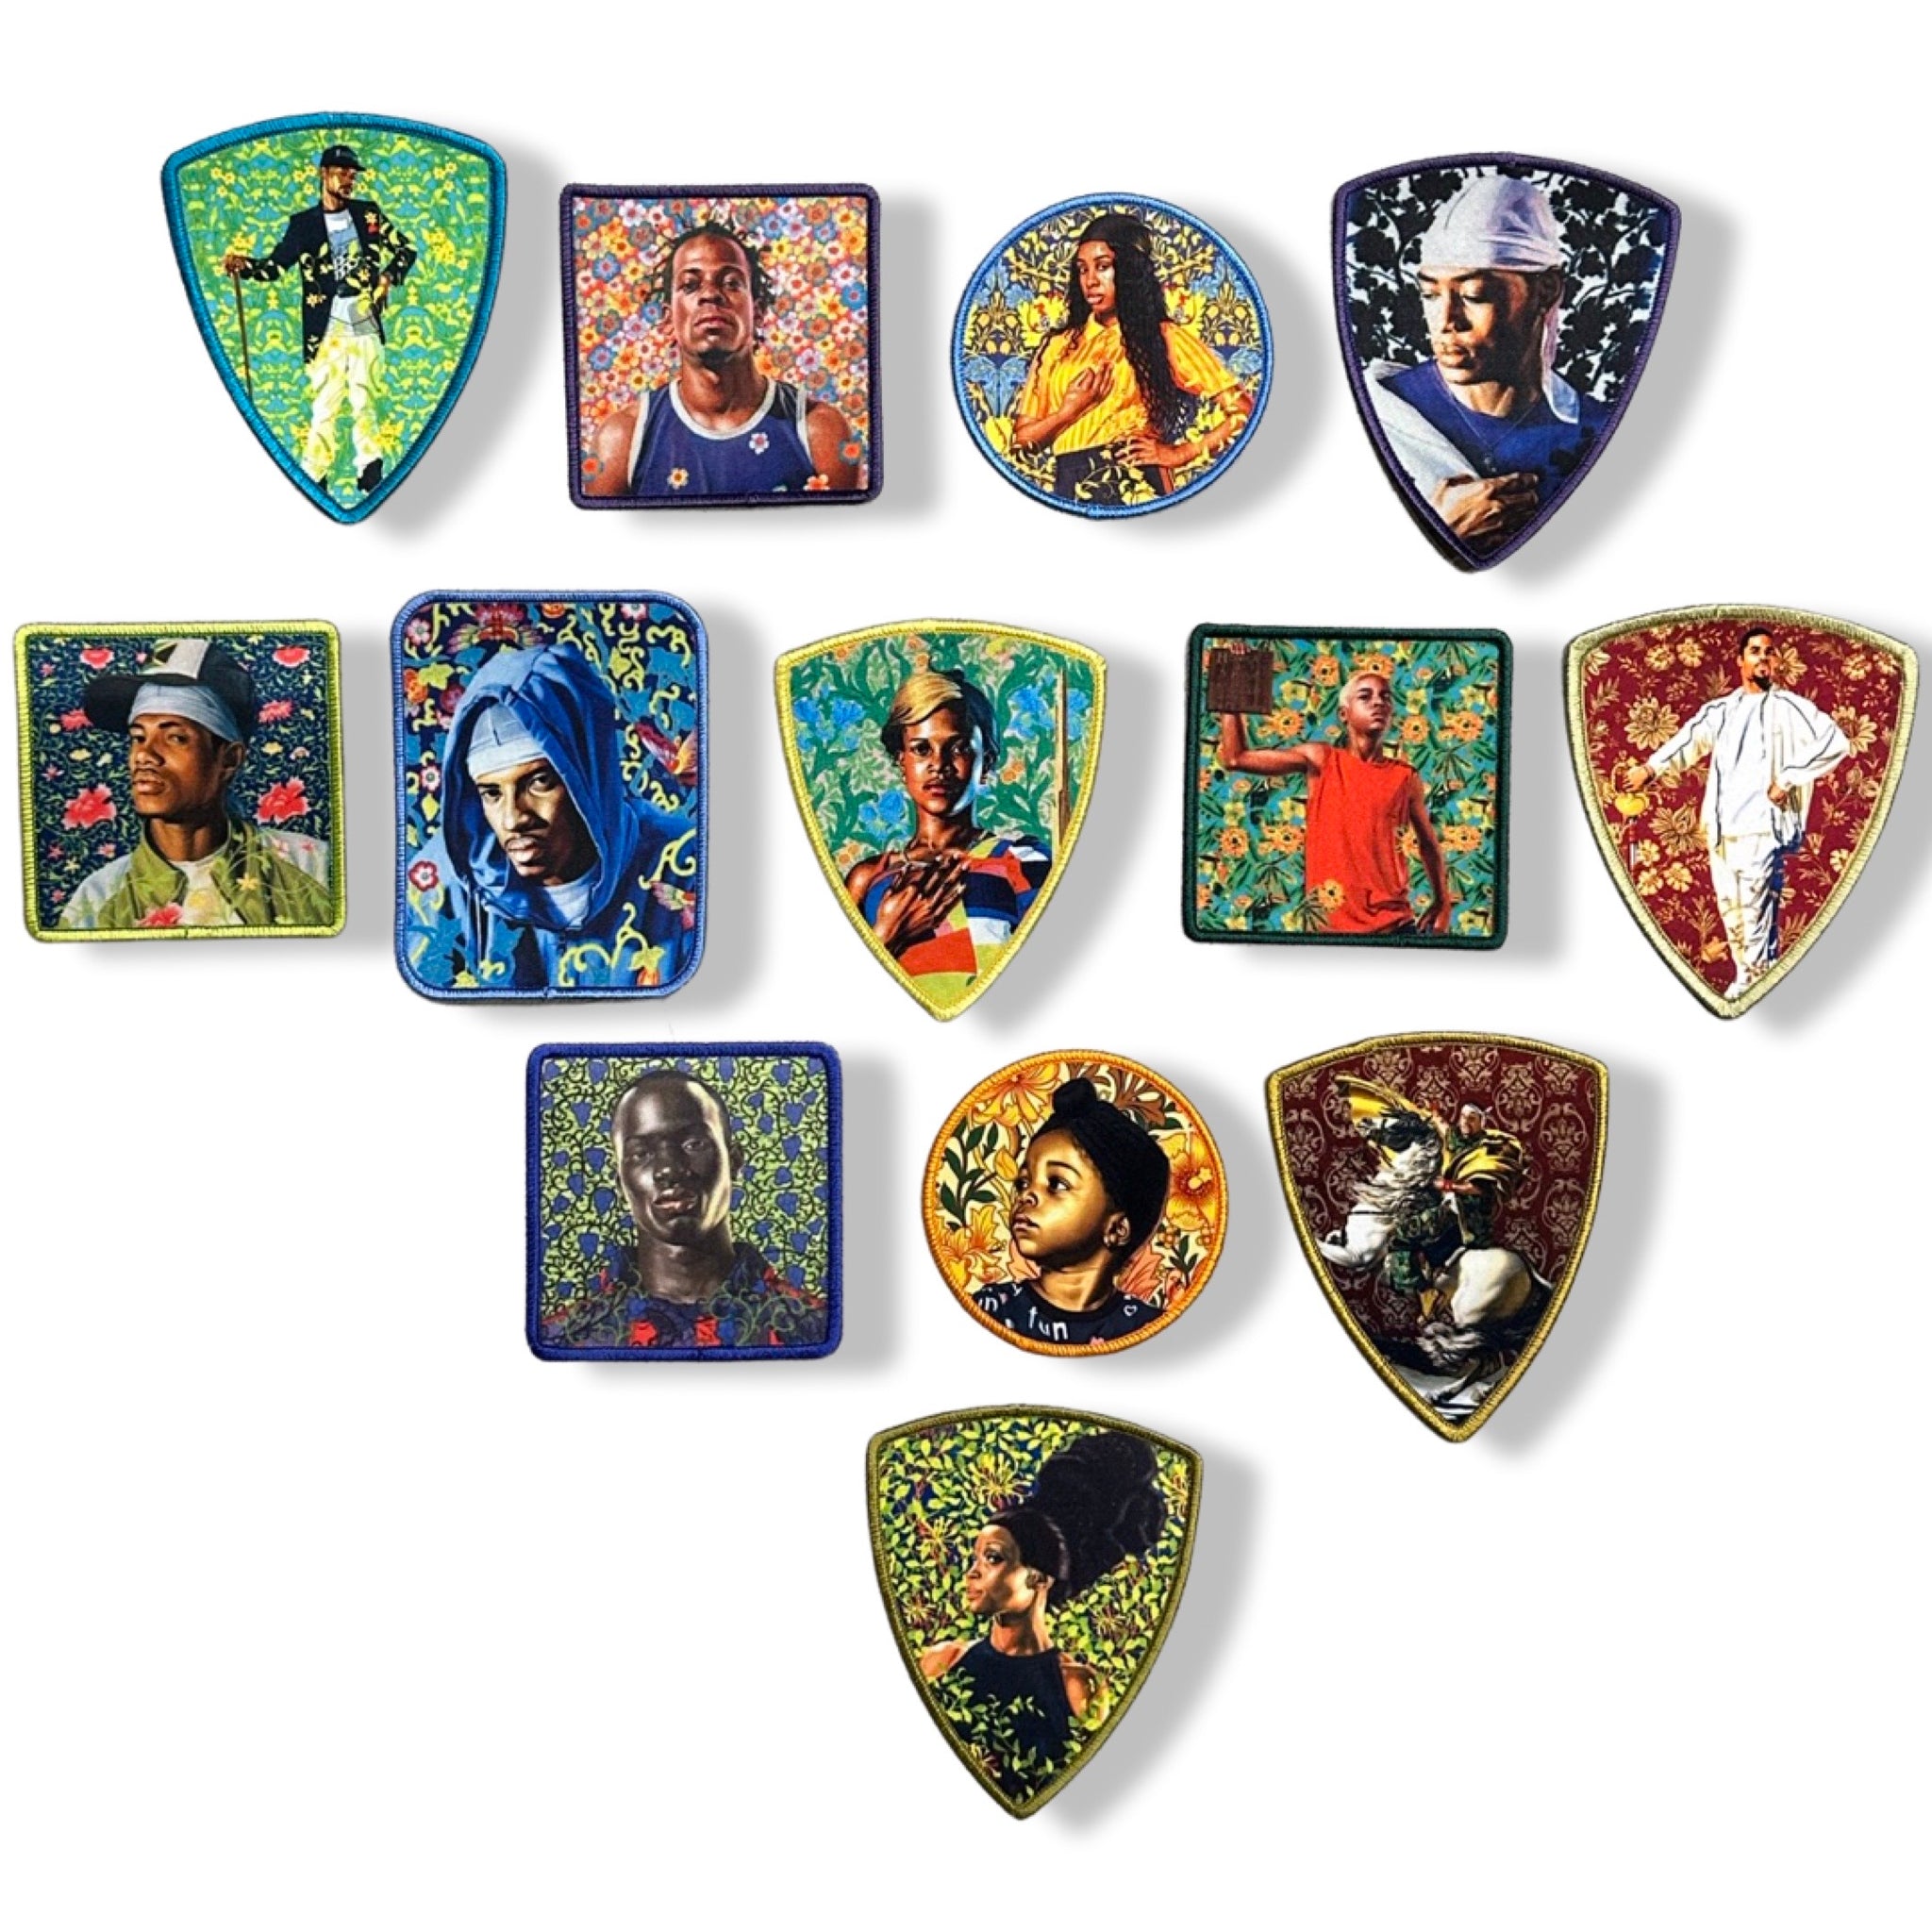 Kehinde Wiley - Patch set